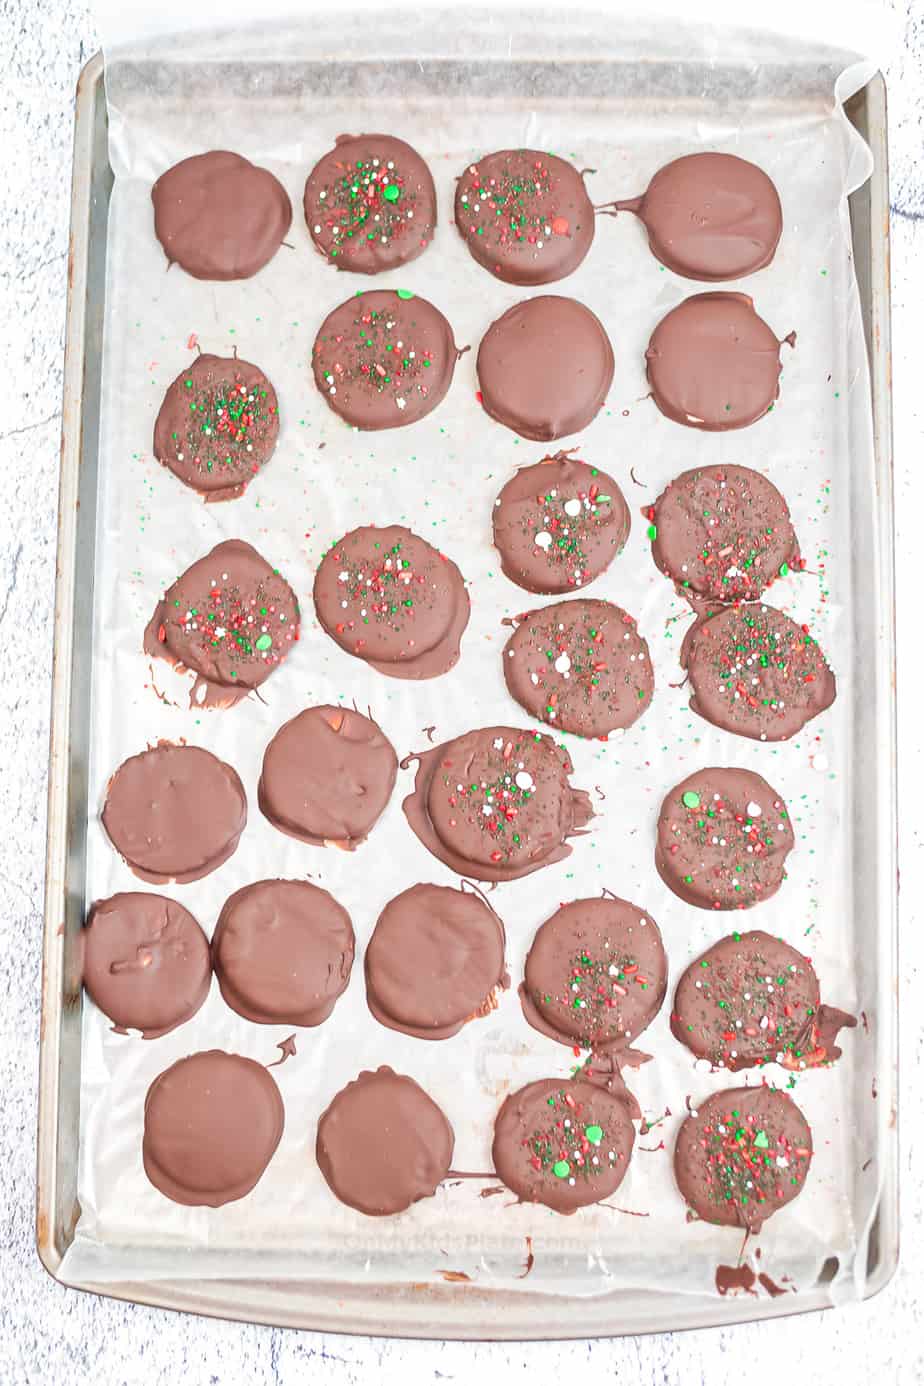 Peppermint patty candies dipped in chocolate on a baking pan, some topped with sprinkles